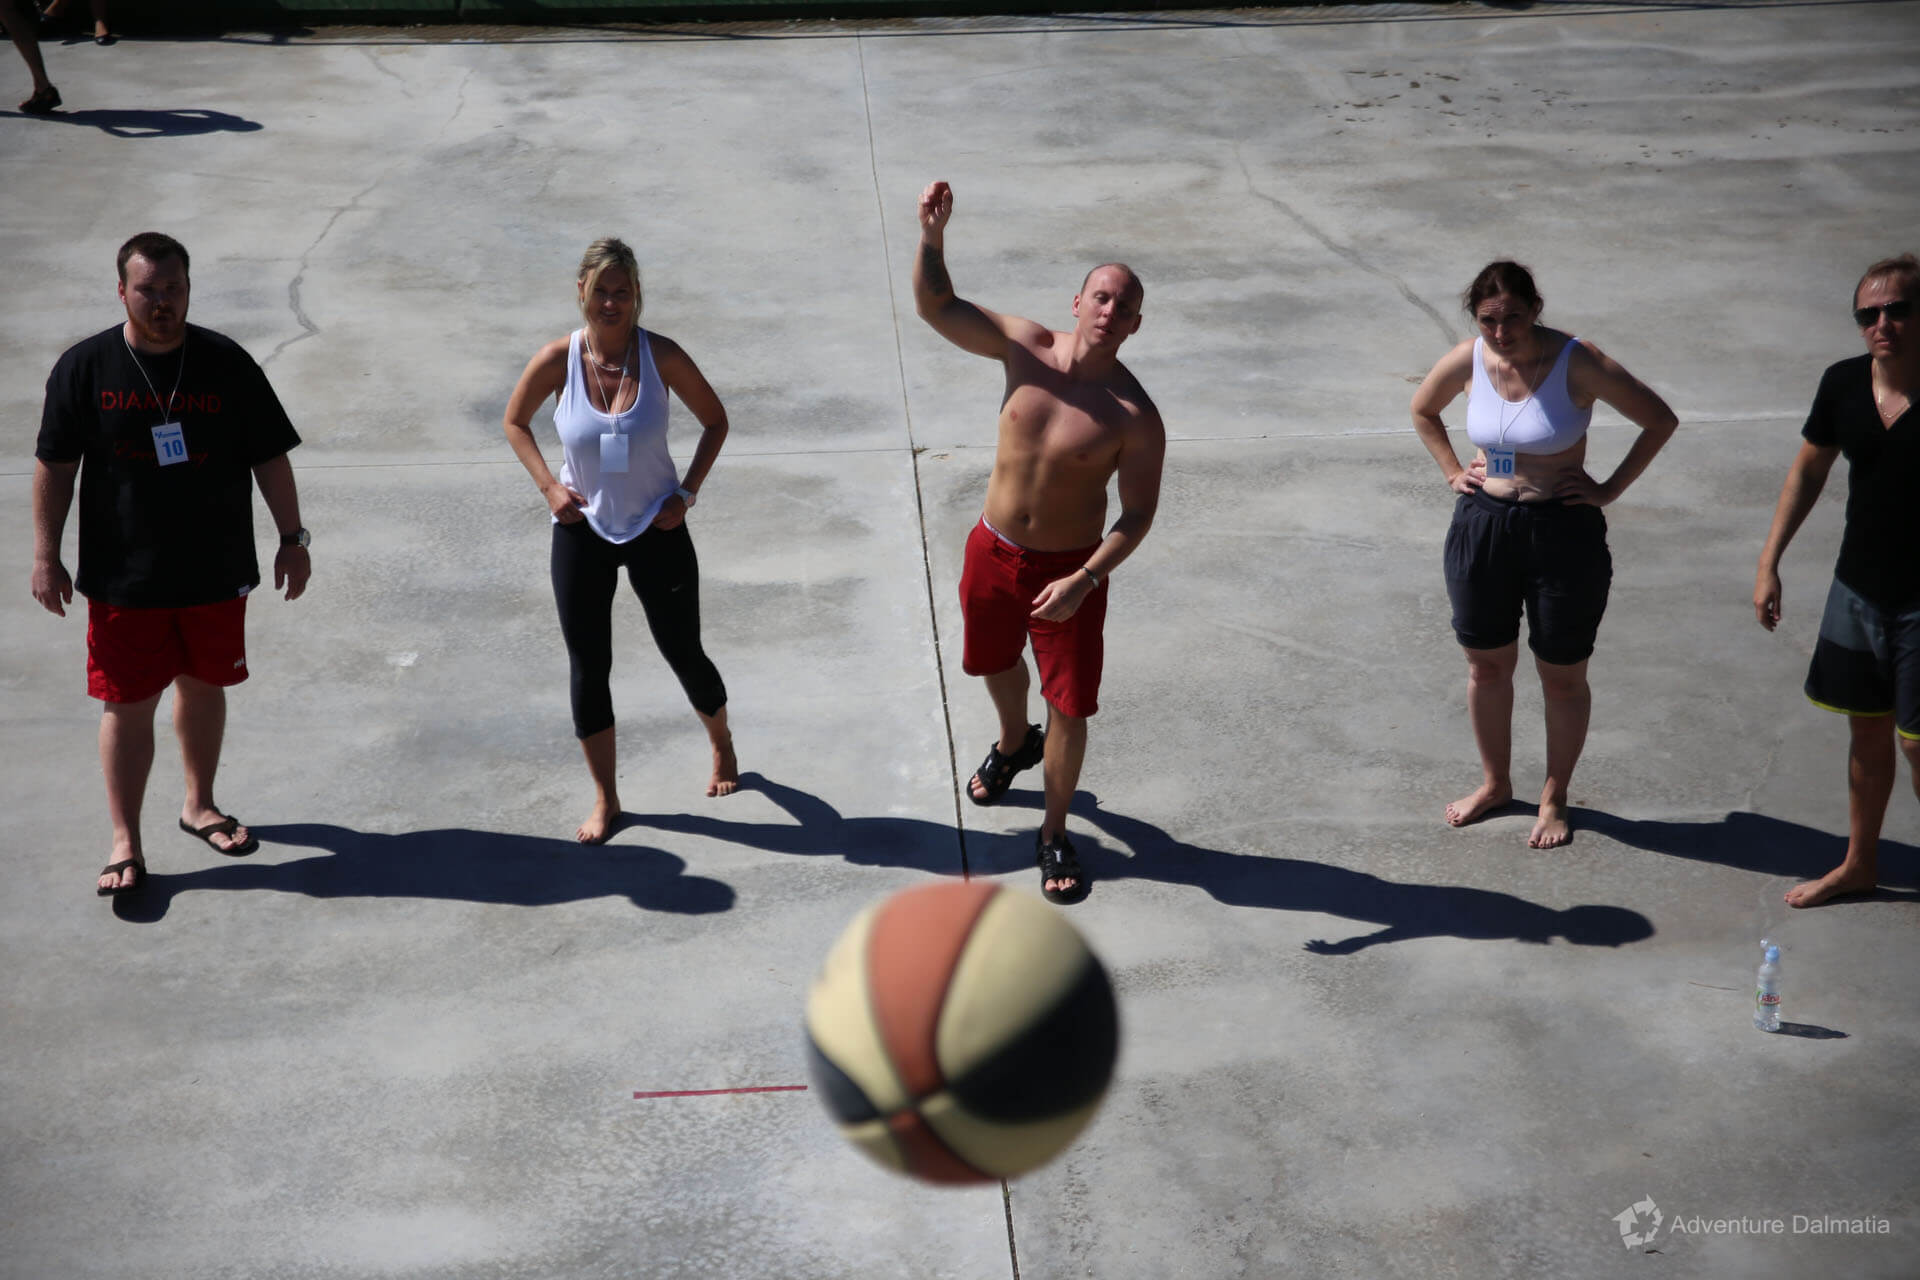 Basketball competition is a part of Split Adventure's team building games.